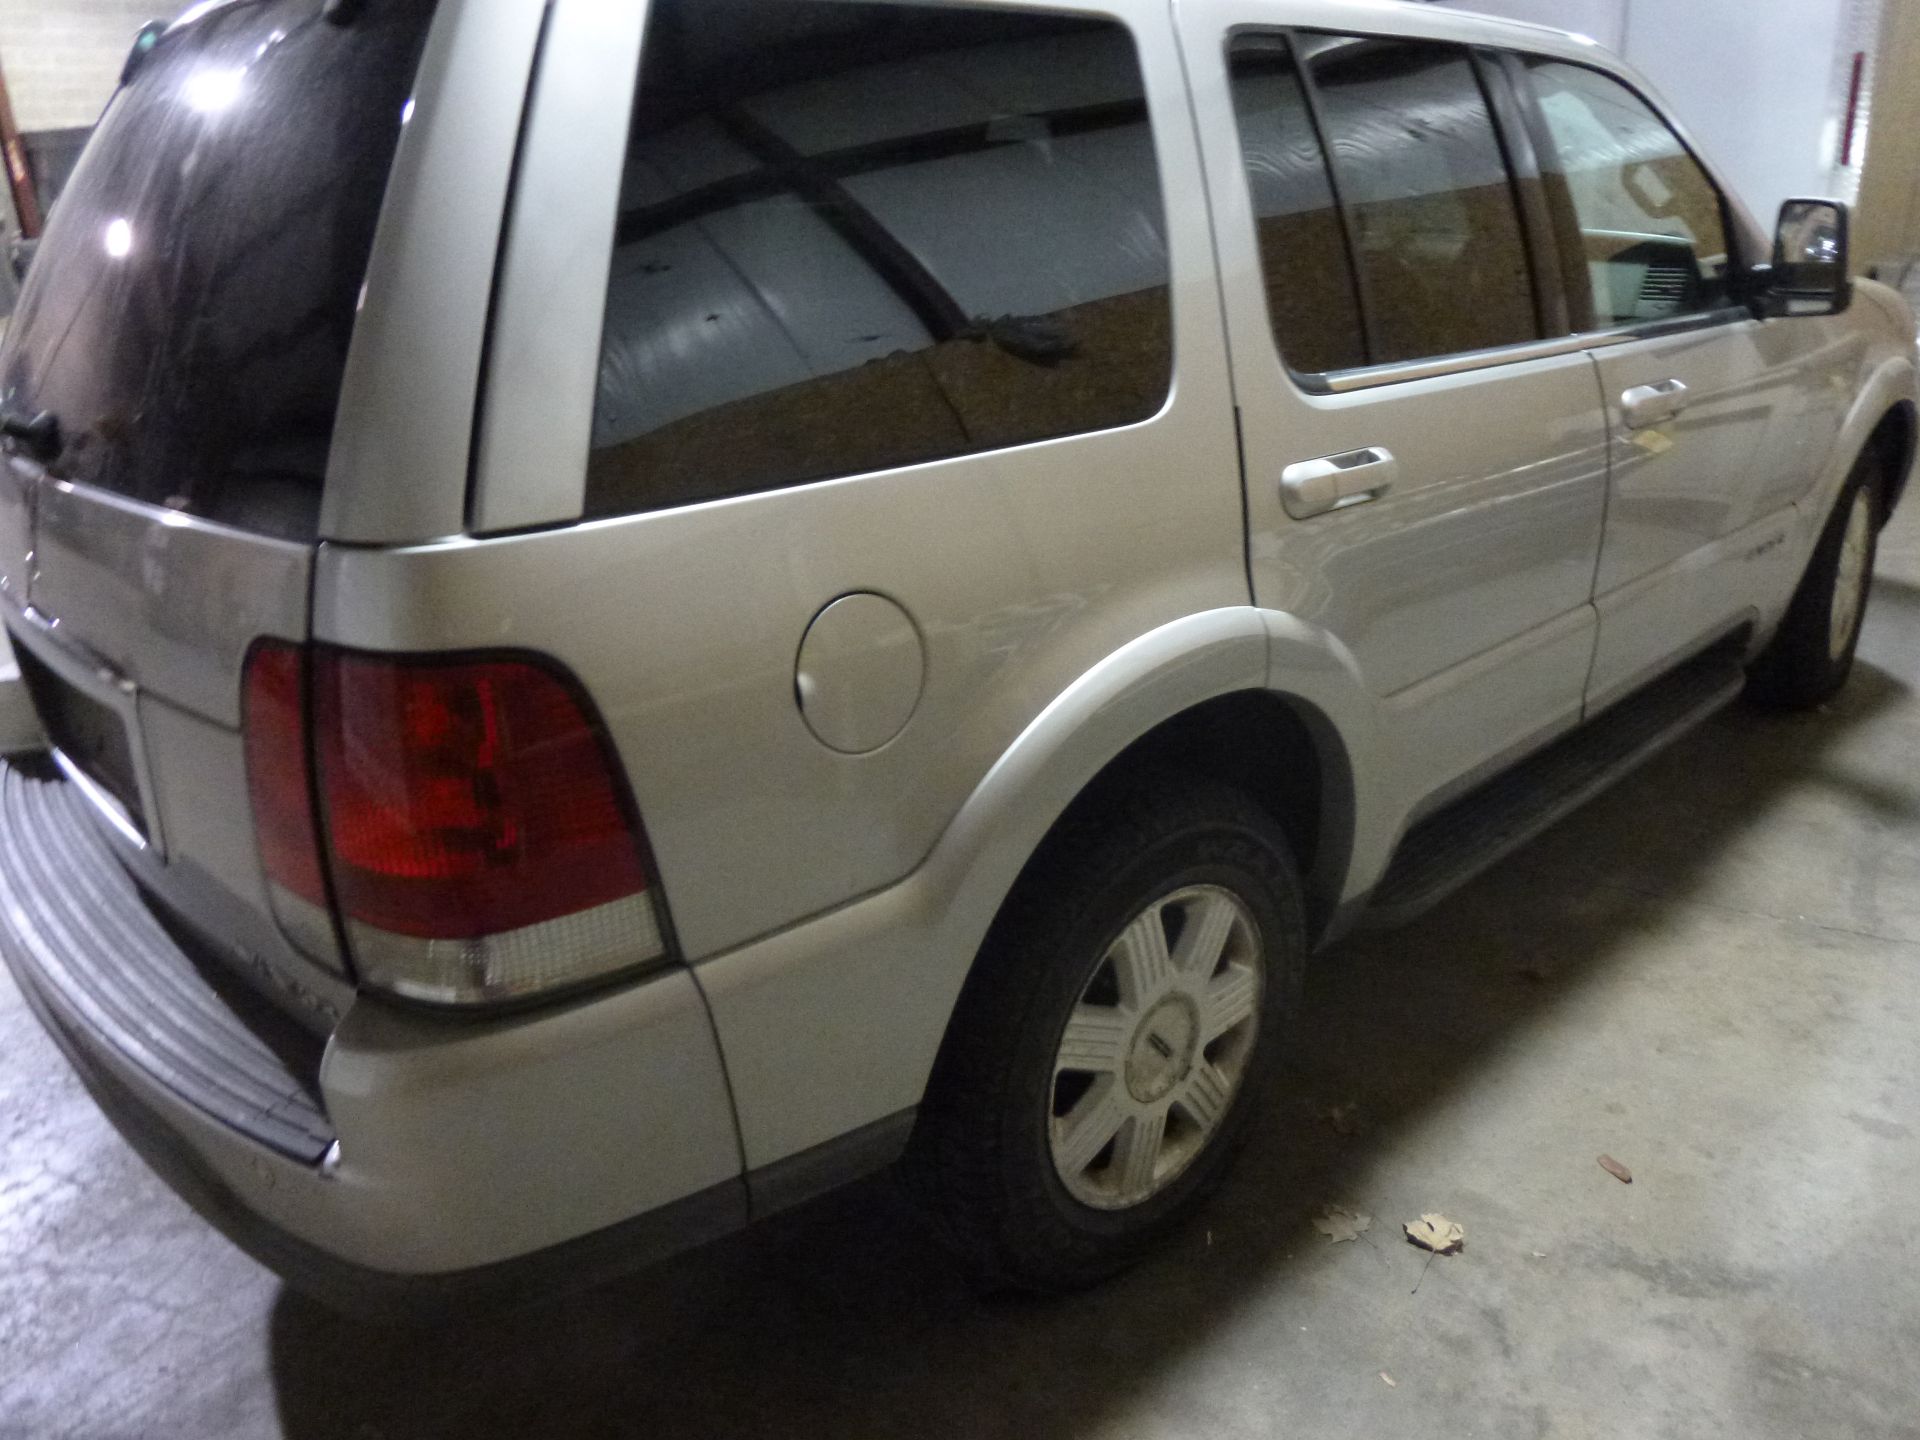 2003 Lincoln Aviator Miles 106974 VIN # 5LMEU78HX3ZJ39820 NO TITLE, This was a seized vehicle that - Image 5 of 12